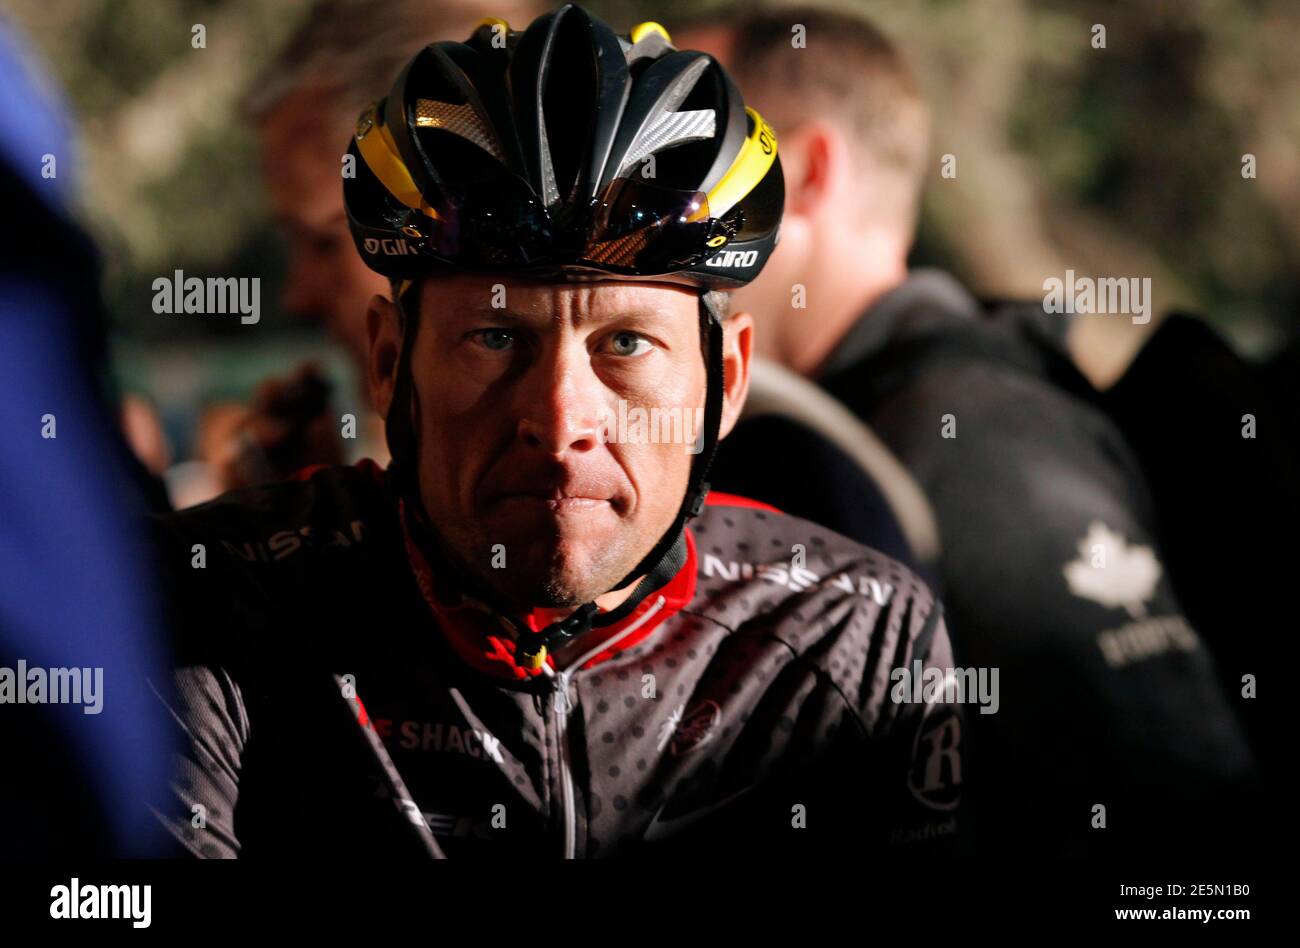 tvetydig Lee ophobe MOVES TUES DEC 21 Seven-time Tour de France winner Lance Armstrong awaits  the start of the 2010 Cape Argus Cycle Tour in Cape Town March 14, 2010.  Cycling has been struck by